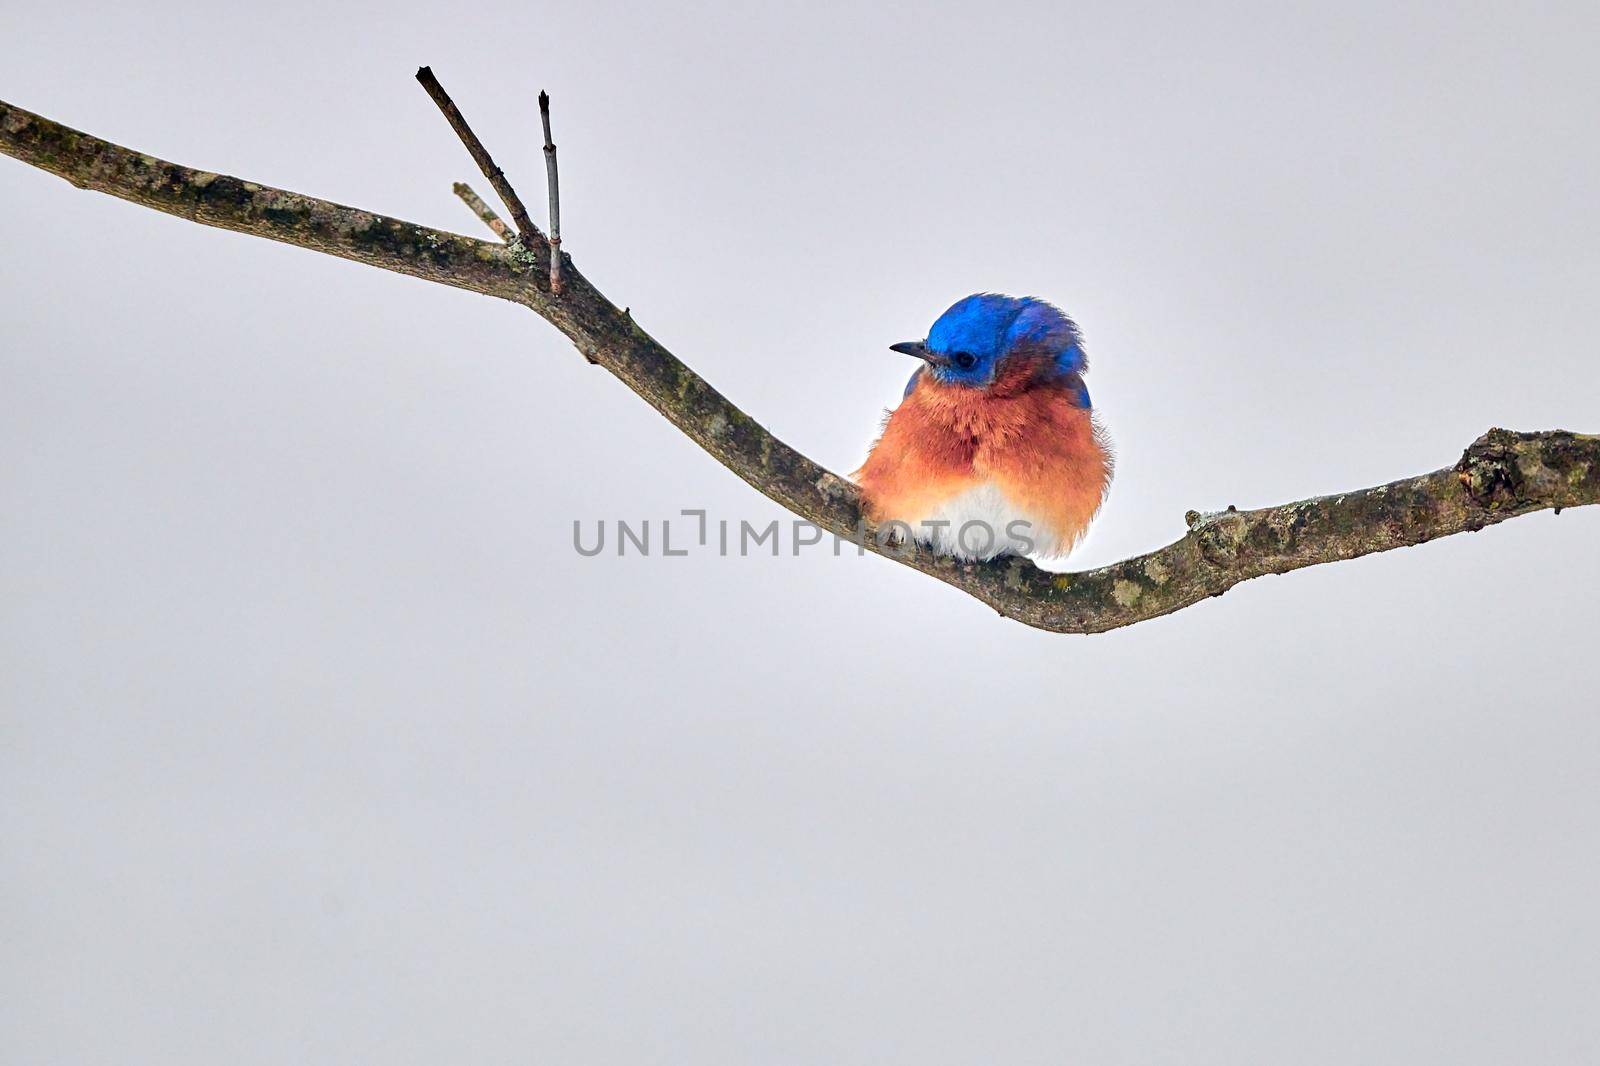 Male Eastern Bluebird perched on a branch with snowy background.